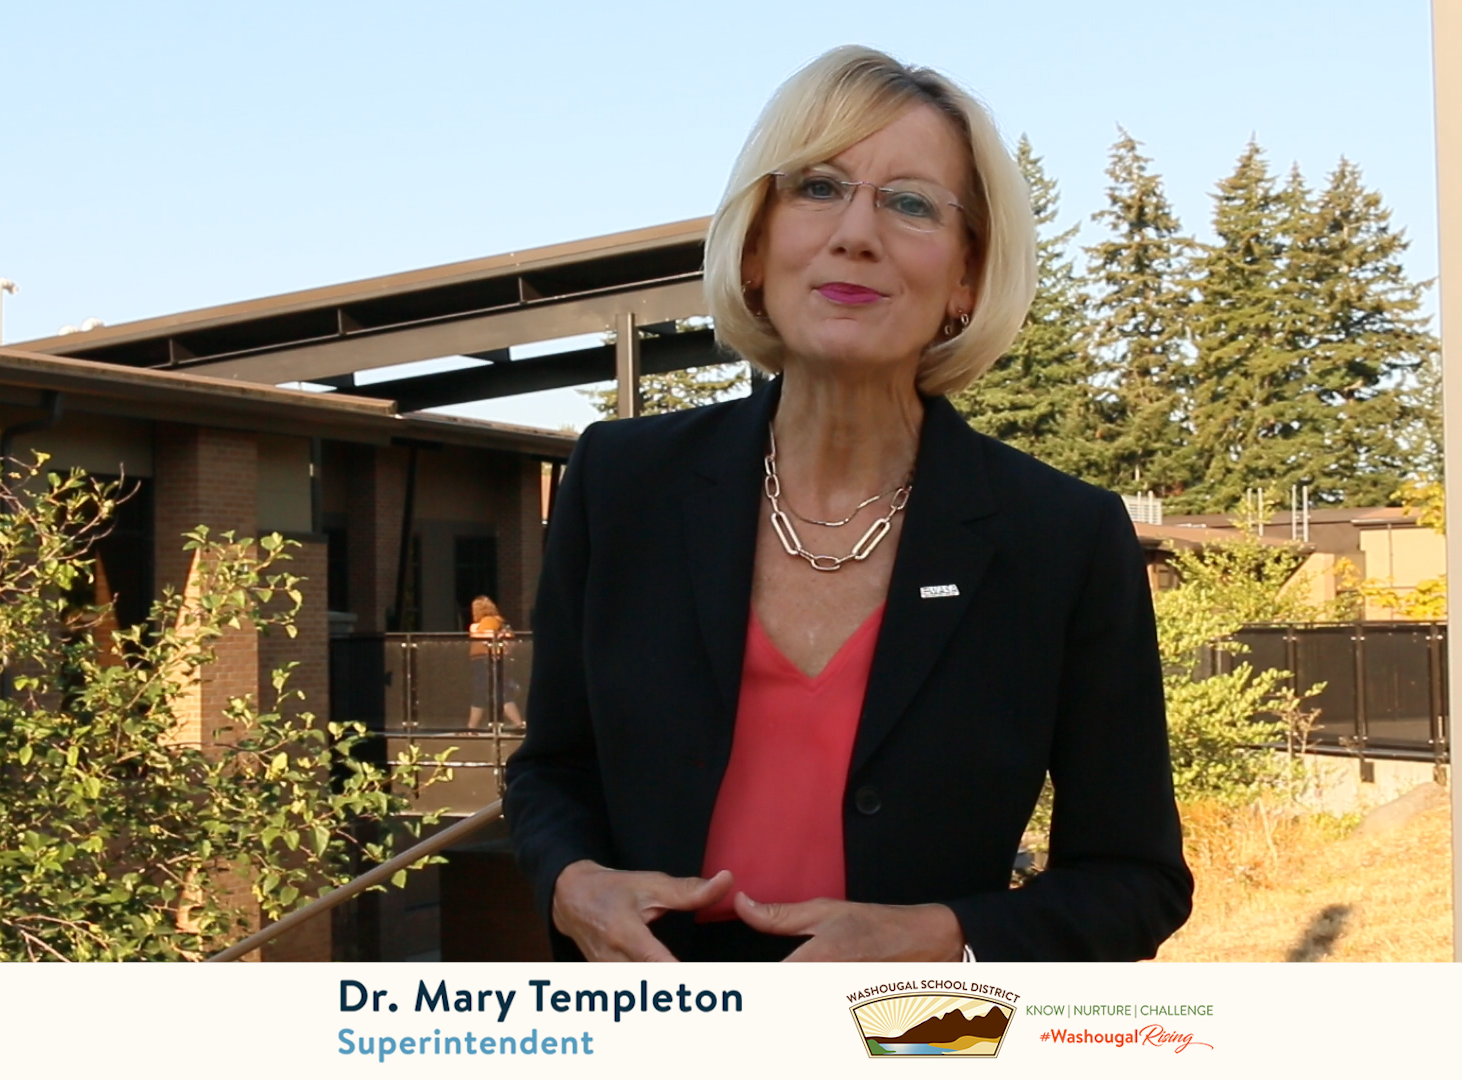 Woman in black suit with blonde hair standing in middle of frame facing camera. Caption bar reads "Dr Mary Templeton, Superintendent."